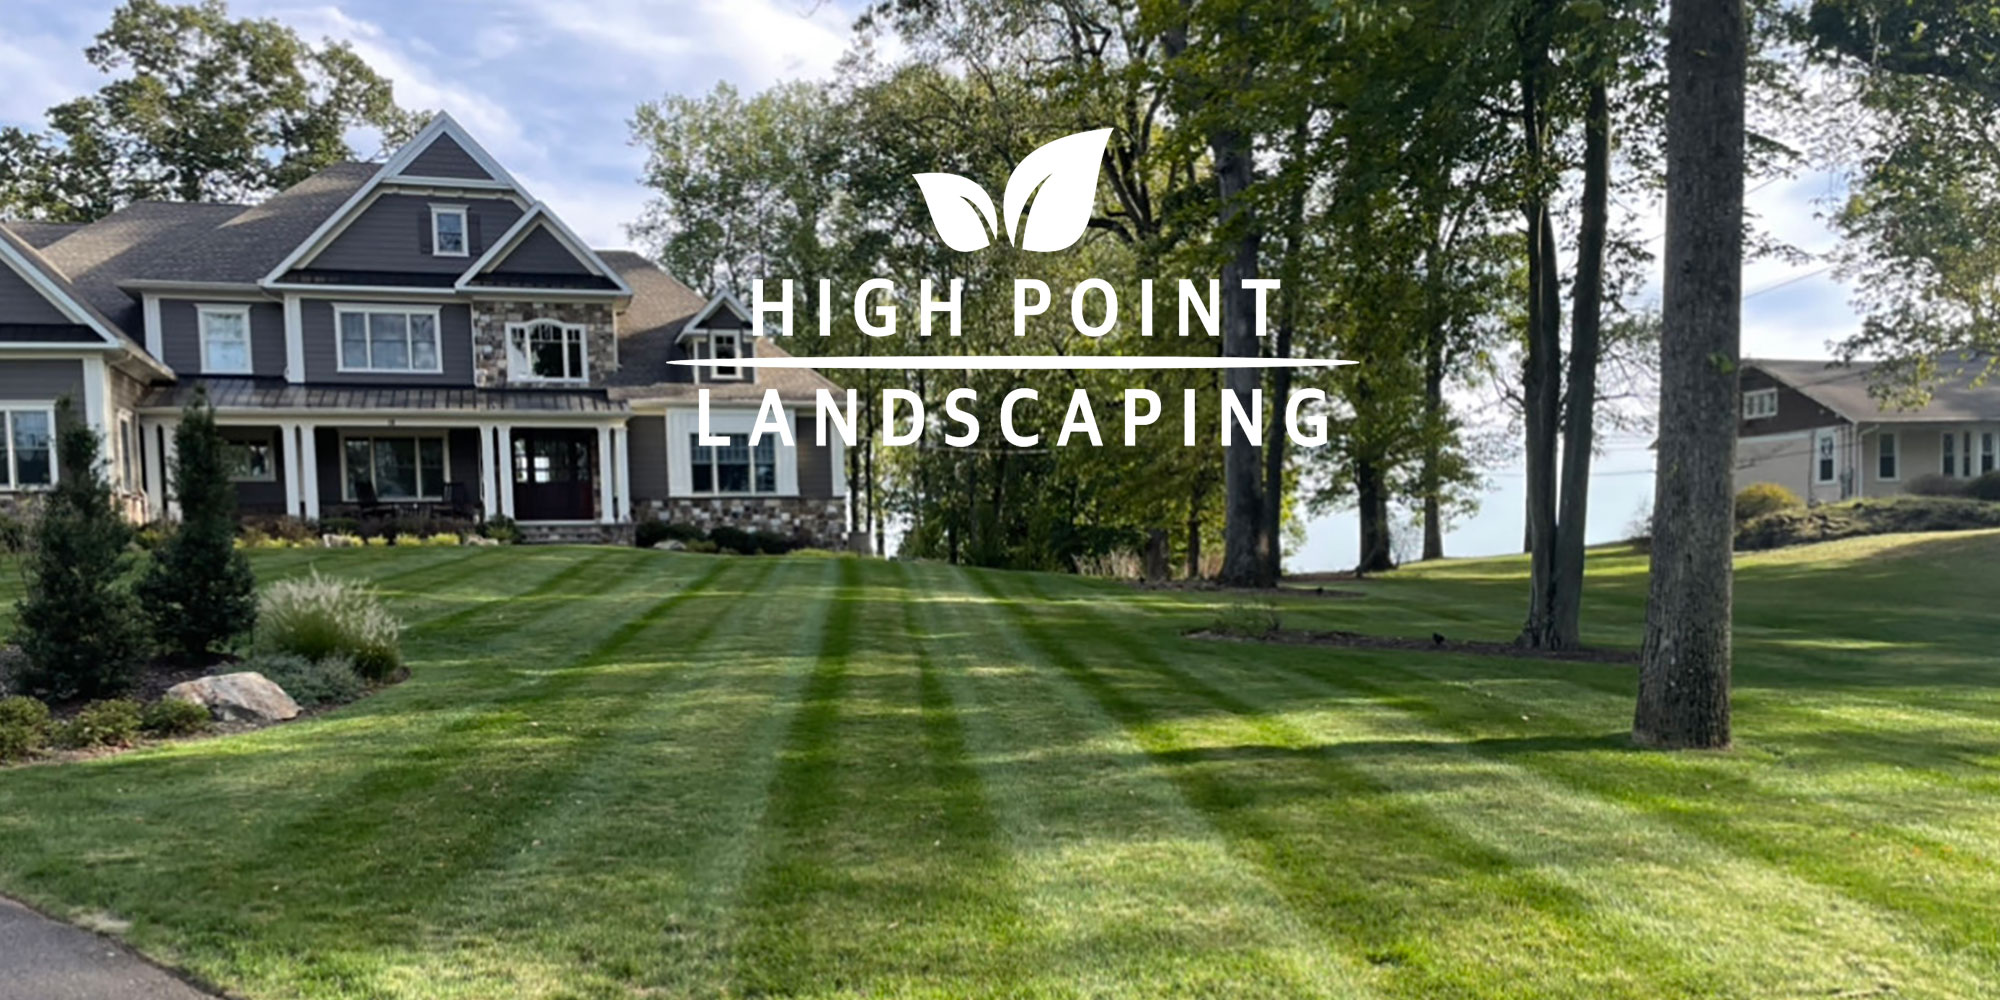 High Point Landscaping Logo